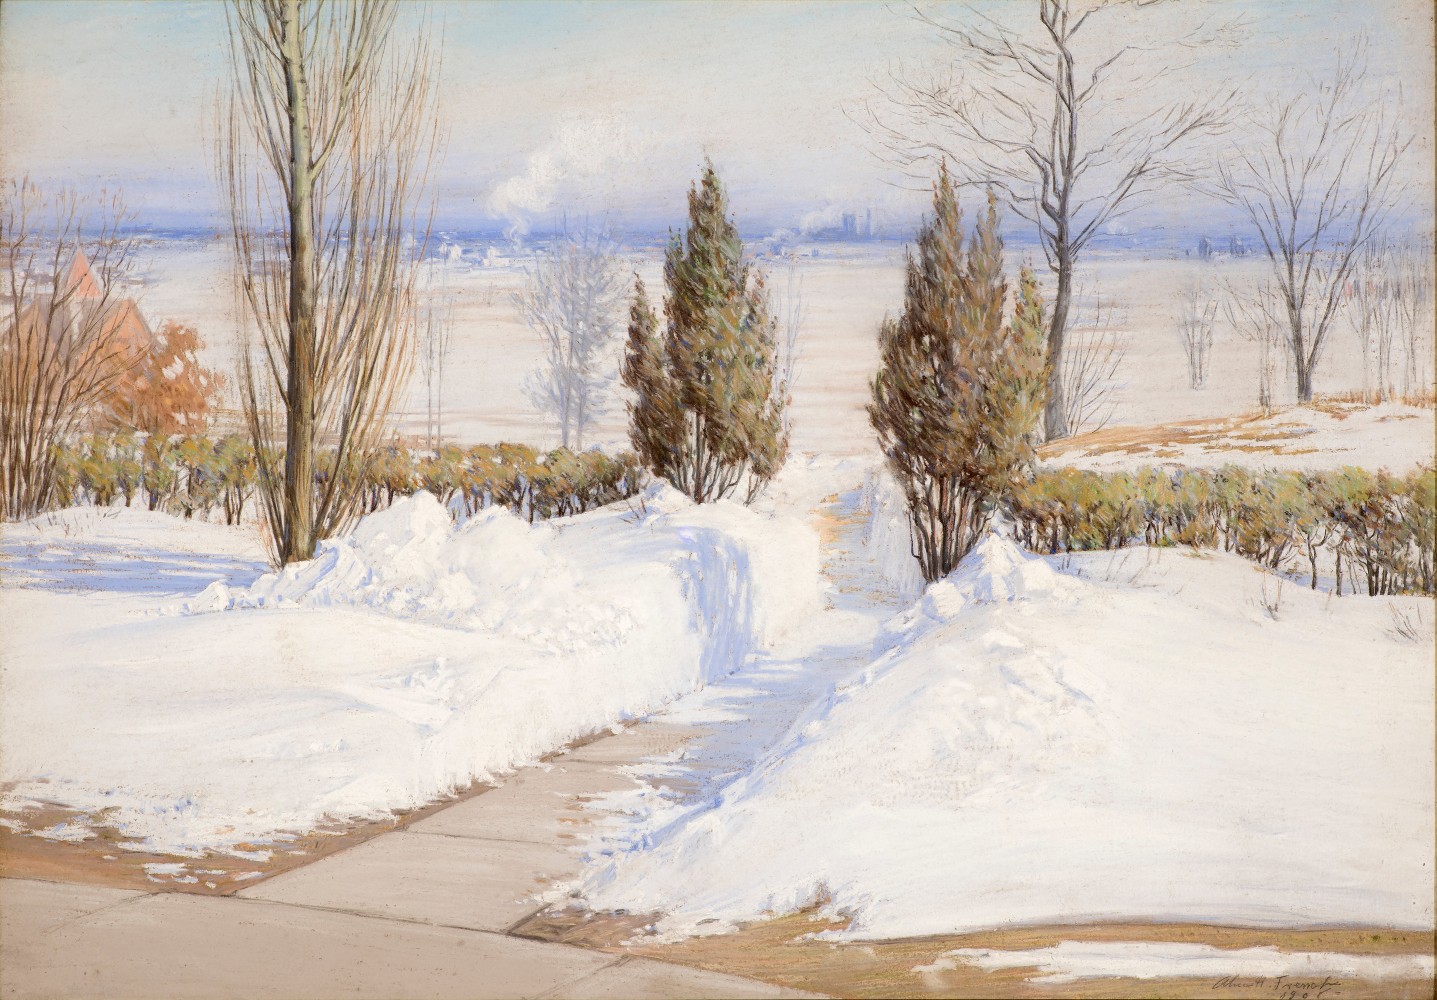 Alice Helm French (1864–after 1953), The Path Through the Drifts, Chicago, 1908, pastel on paper, 23 x 32 in., signed and dated lower right: Alice H. French 1908